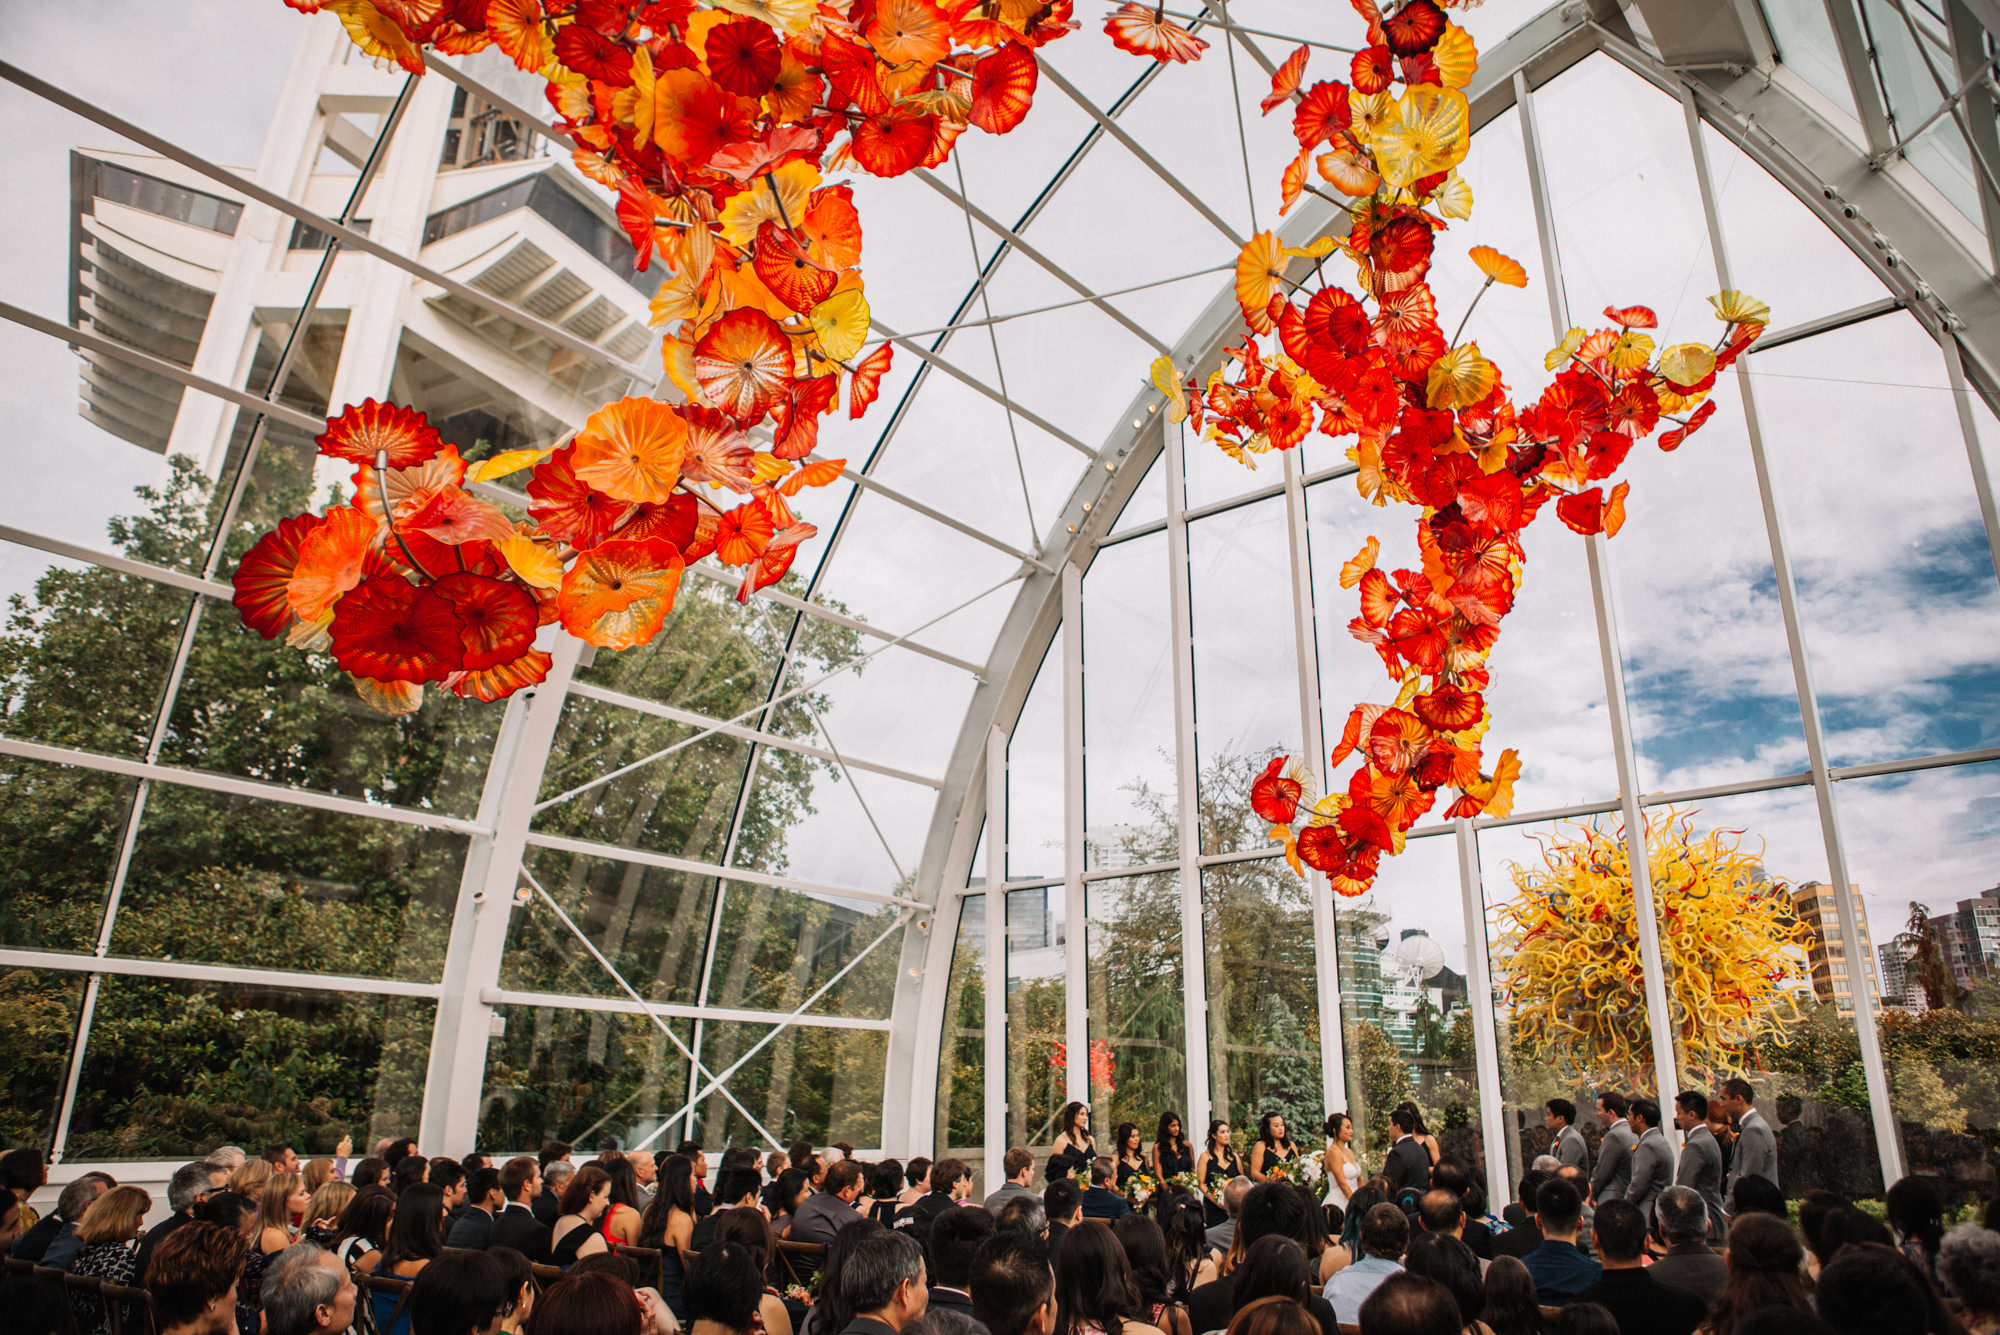 Amy and Jeremy's wedding at Chihuly Garden and Glass, Summer 2016.